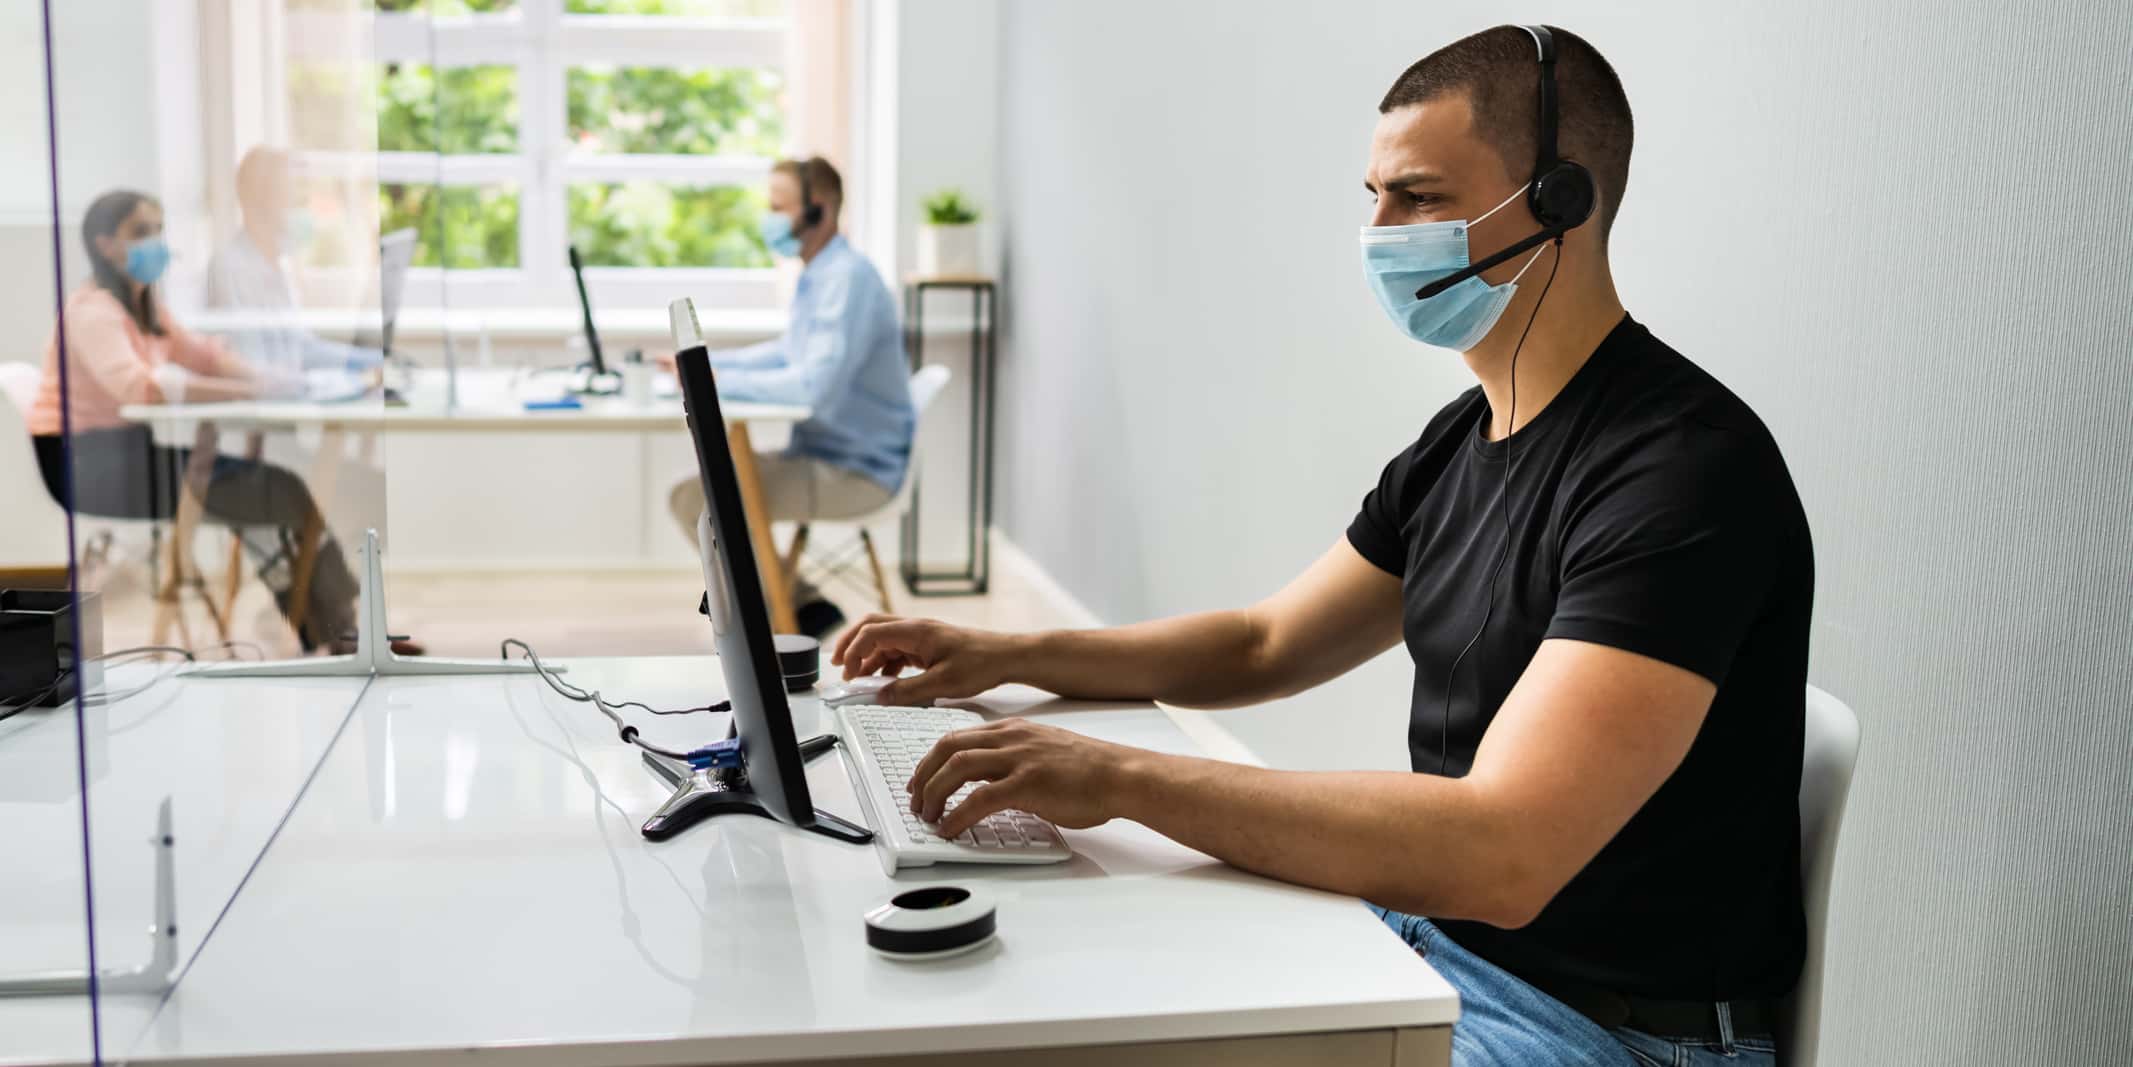 Contact center agent working while wearing a mask